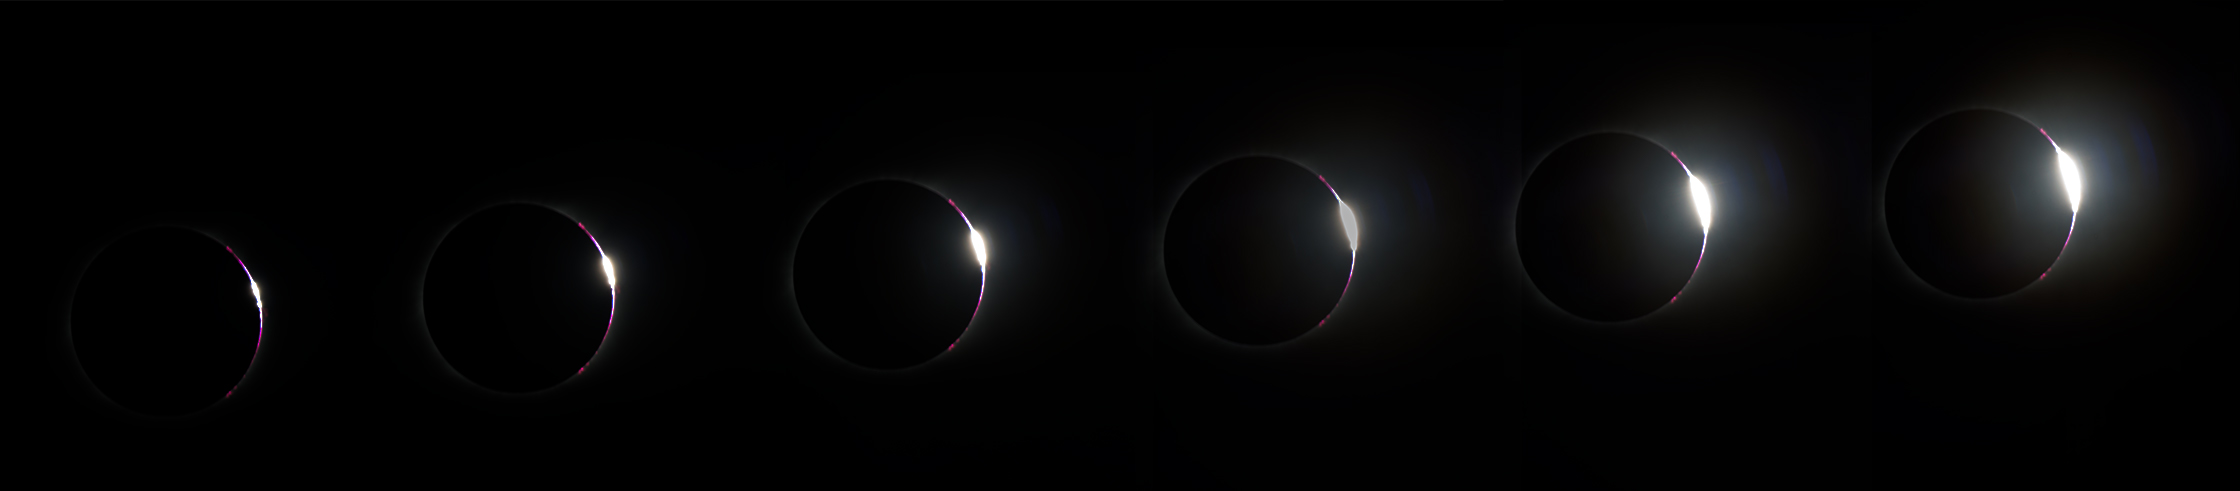 frames of the changes of the eclipse